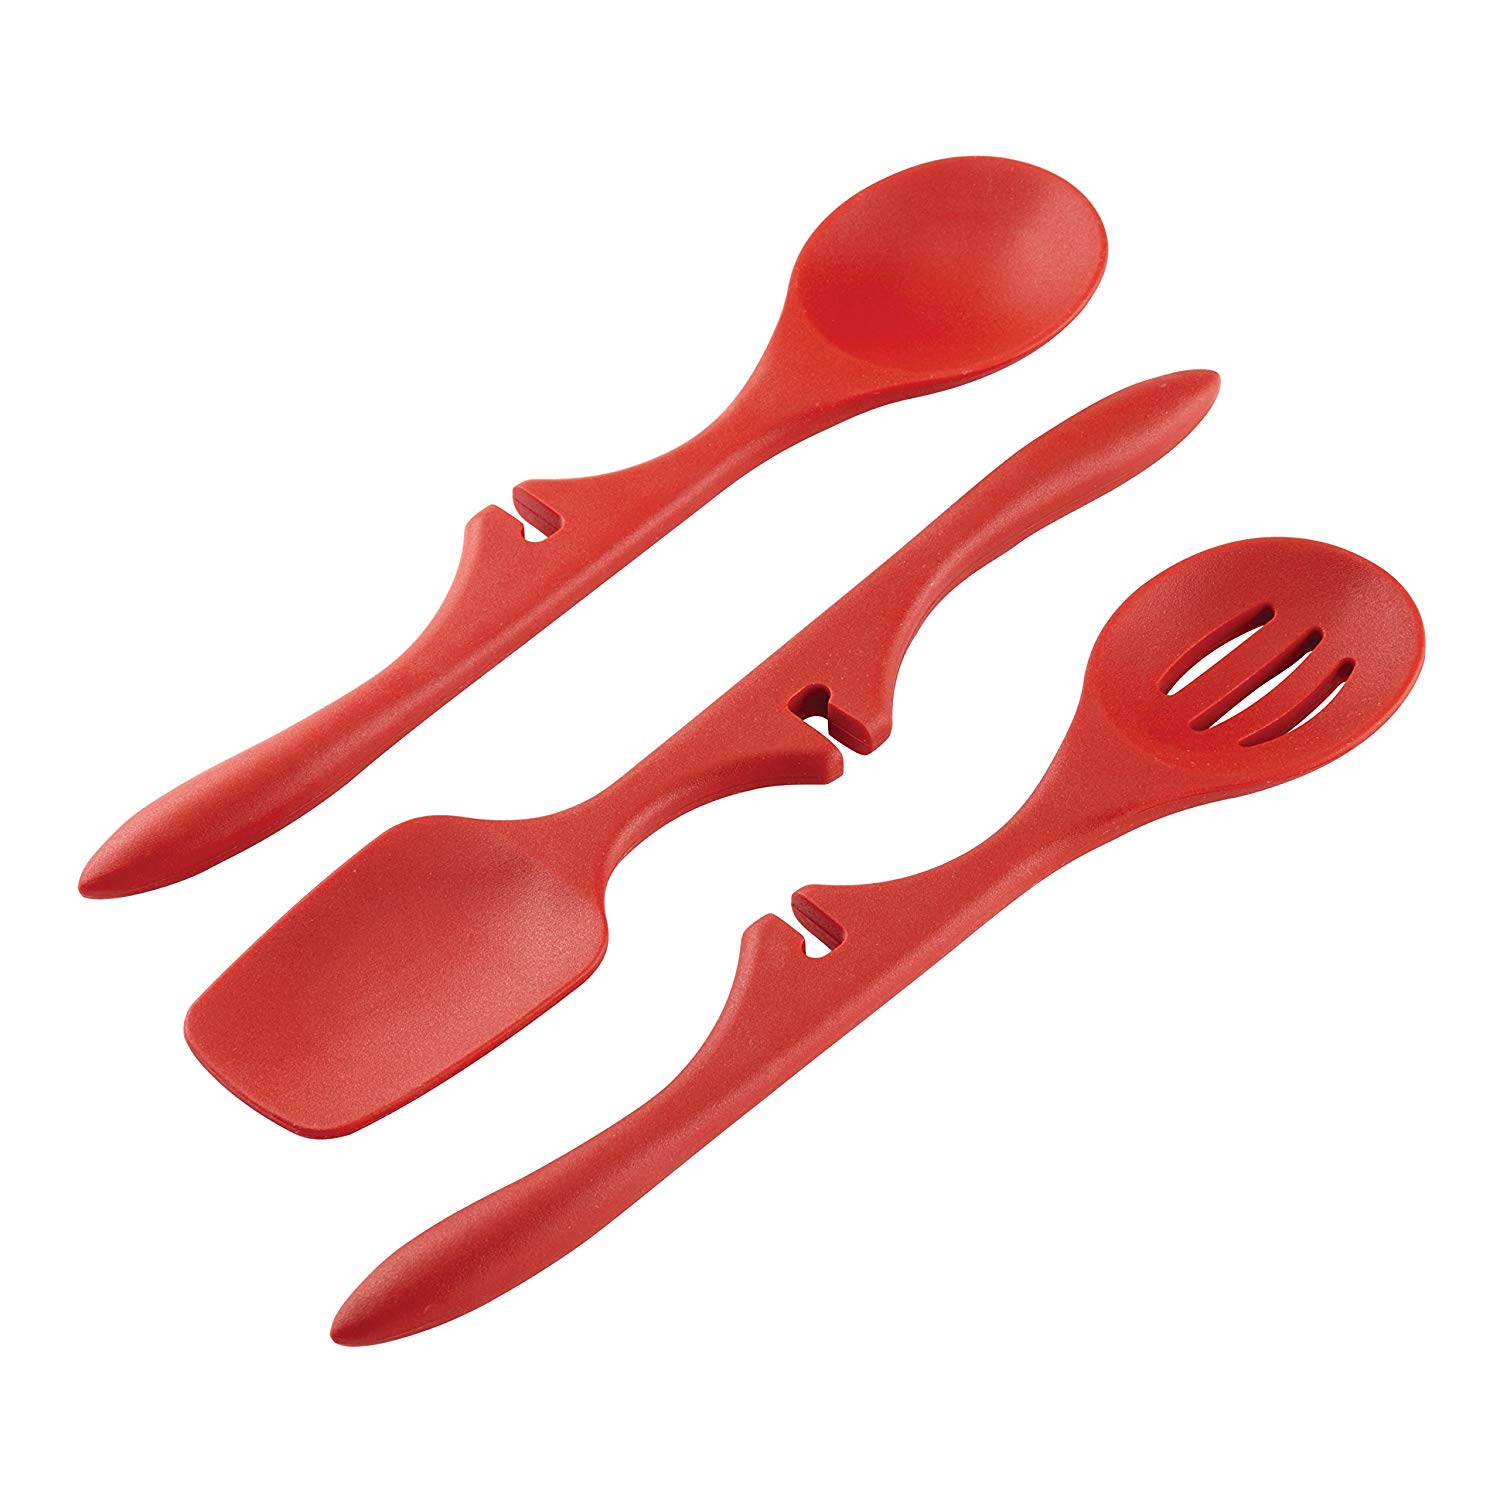 high quality new convenient cooking spoon set for cooking LAZY silicon cooking spoon